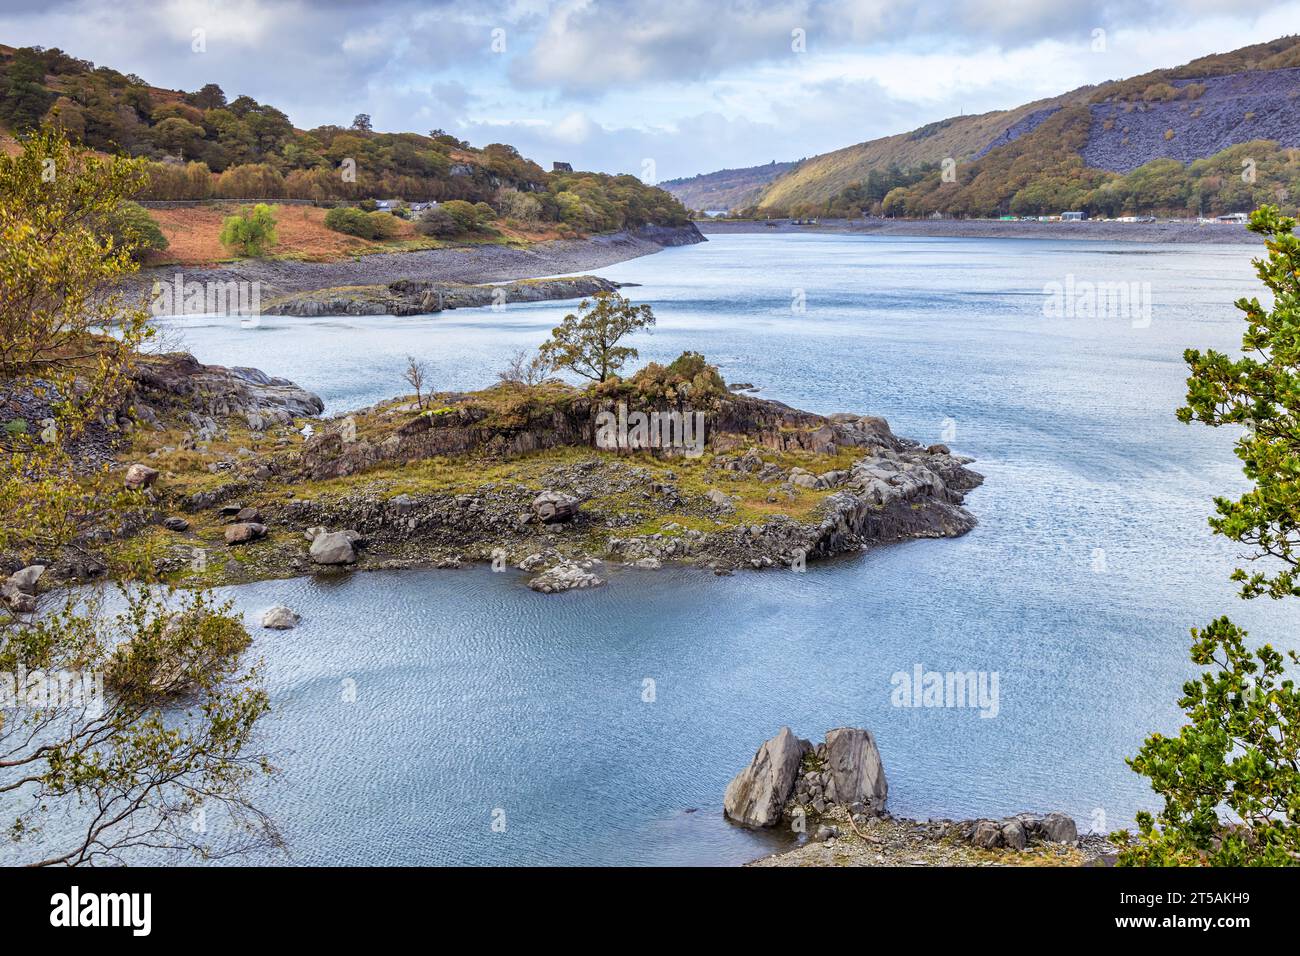 Llyn Peris, with Dinorwic quarry and power station in the background, near Llanberis, Snowdonia National Park, Wales. Stock Photo